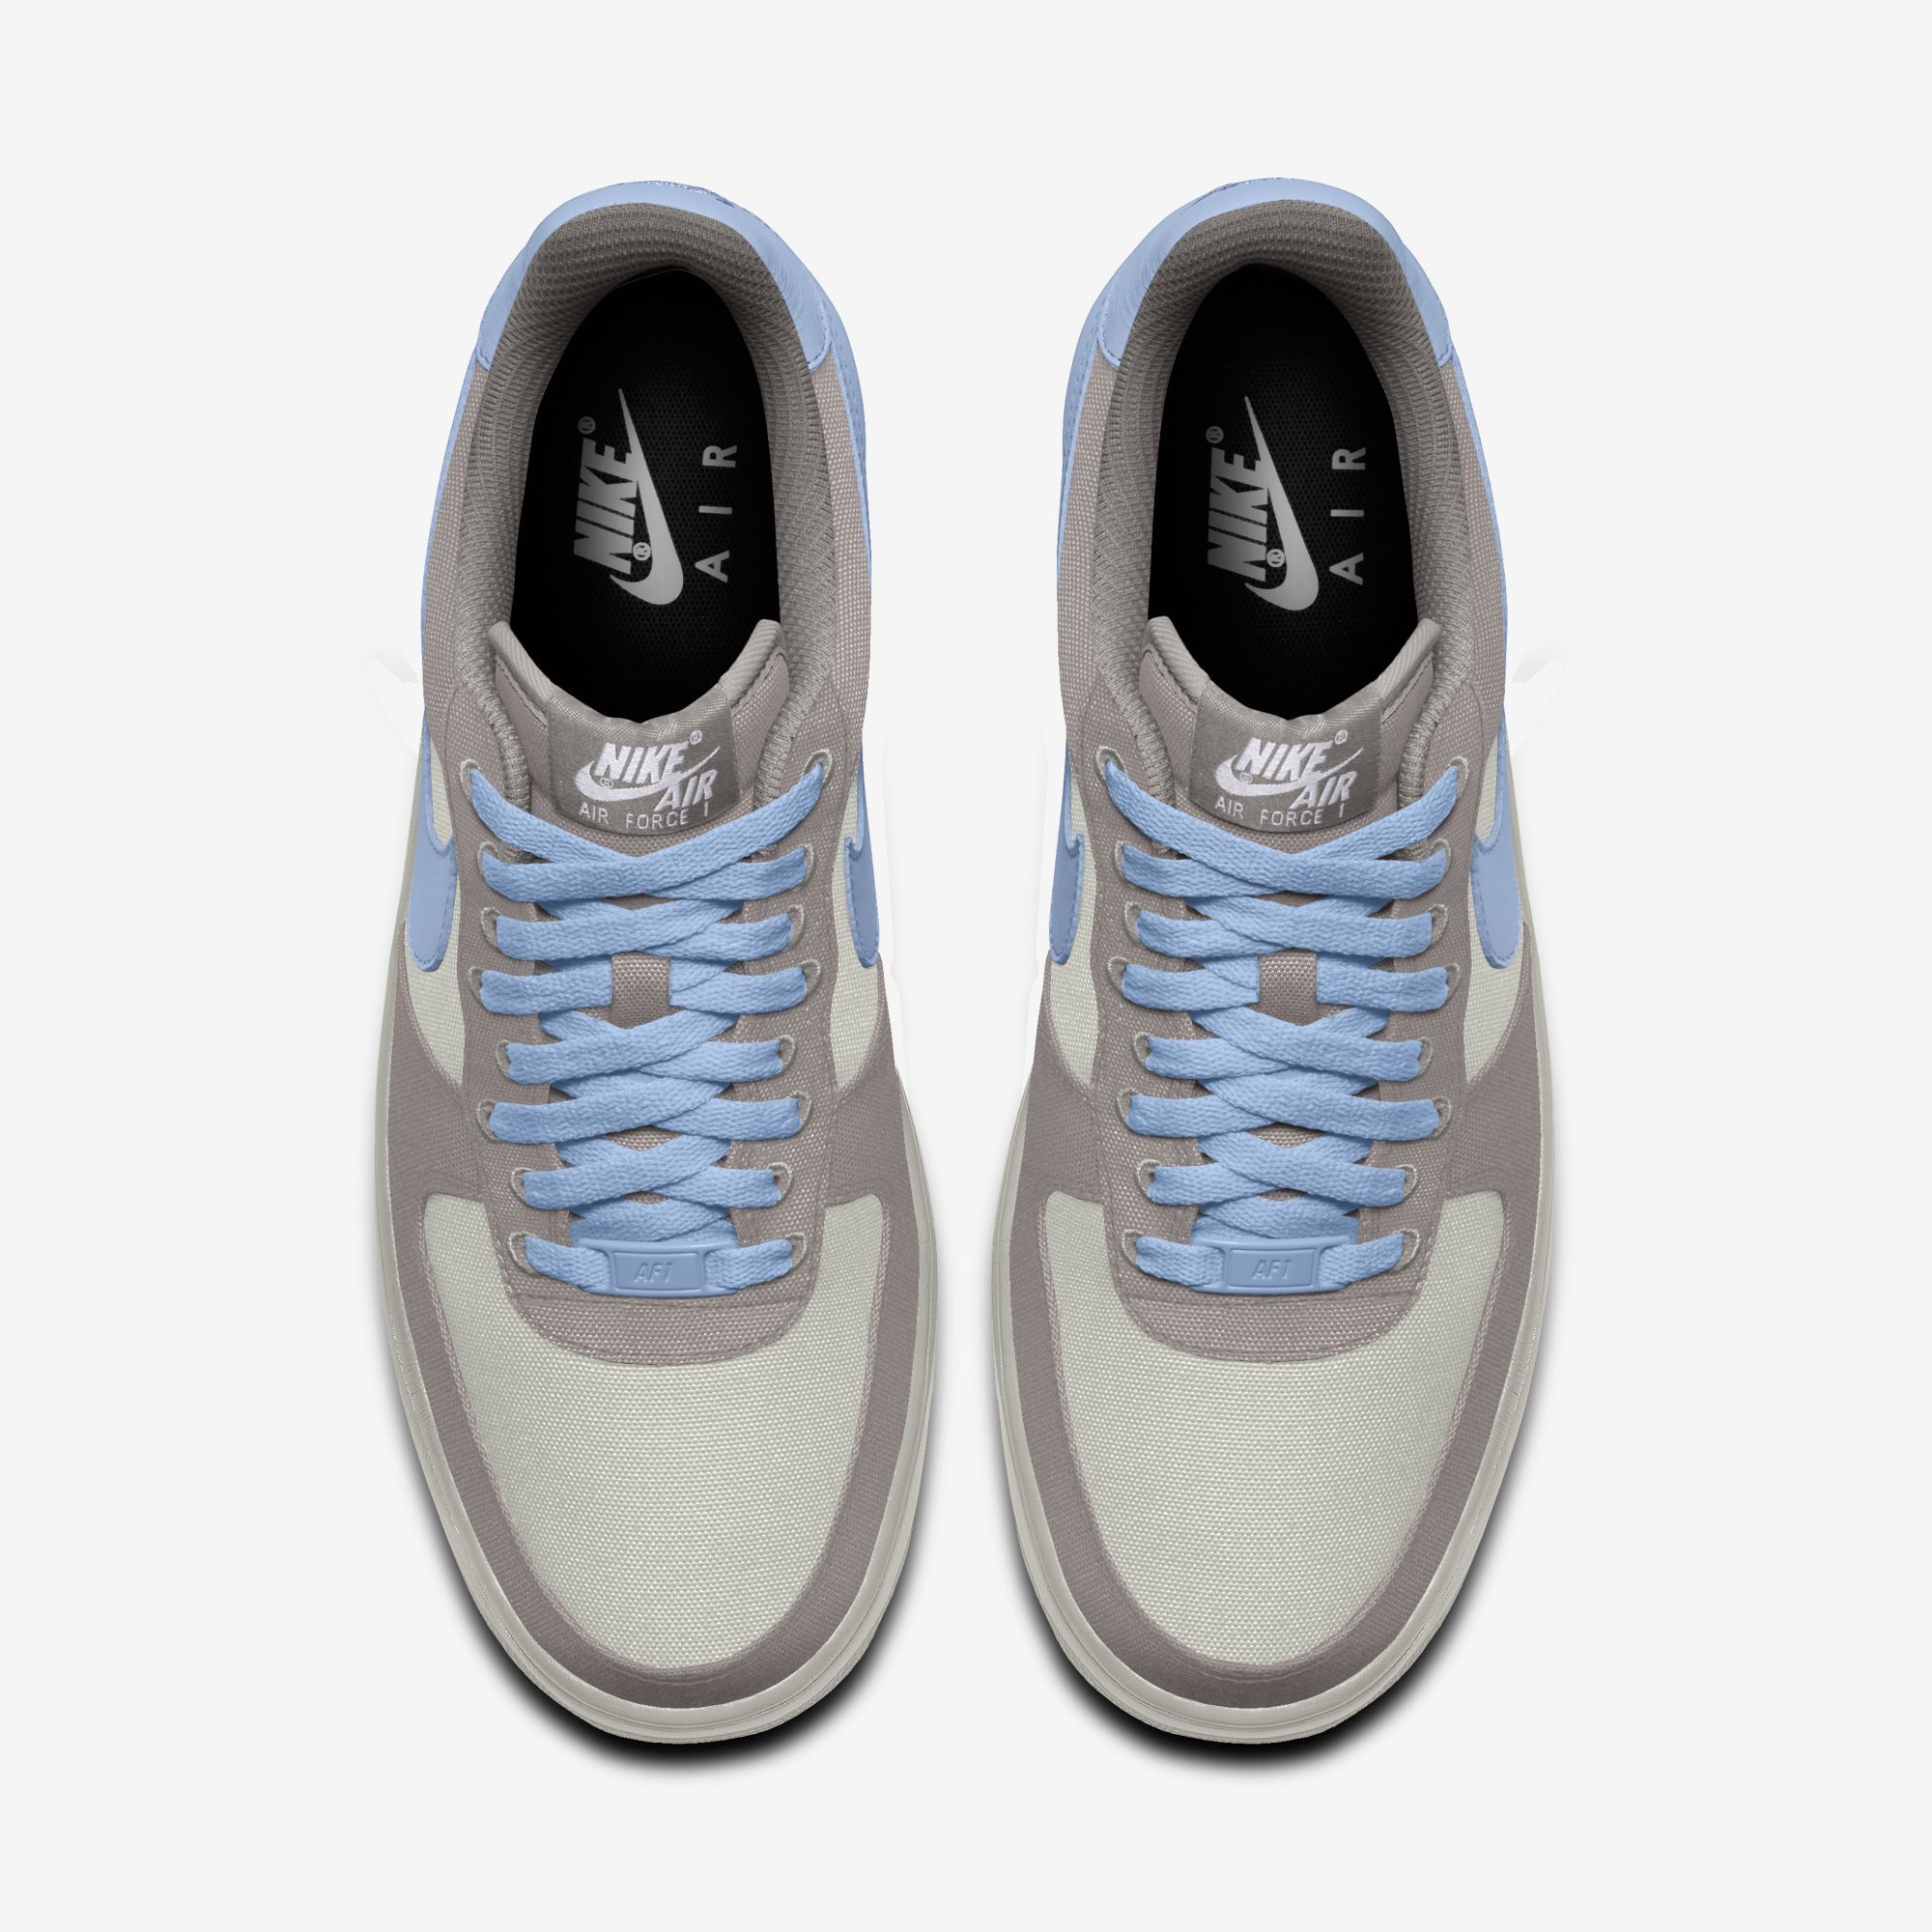  Nike Air Force 1 Low By You - Cobblestone / Royal Tint 